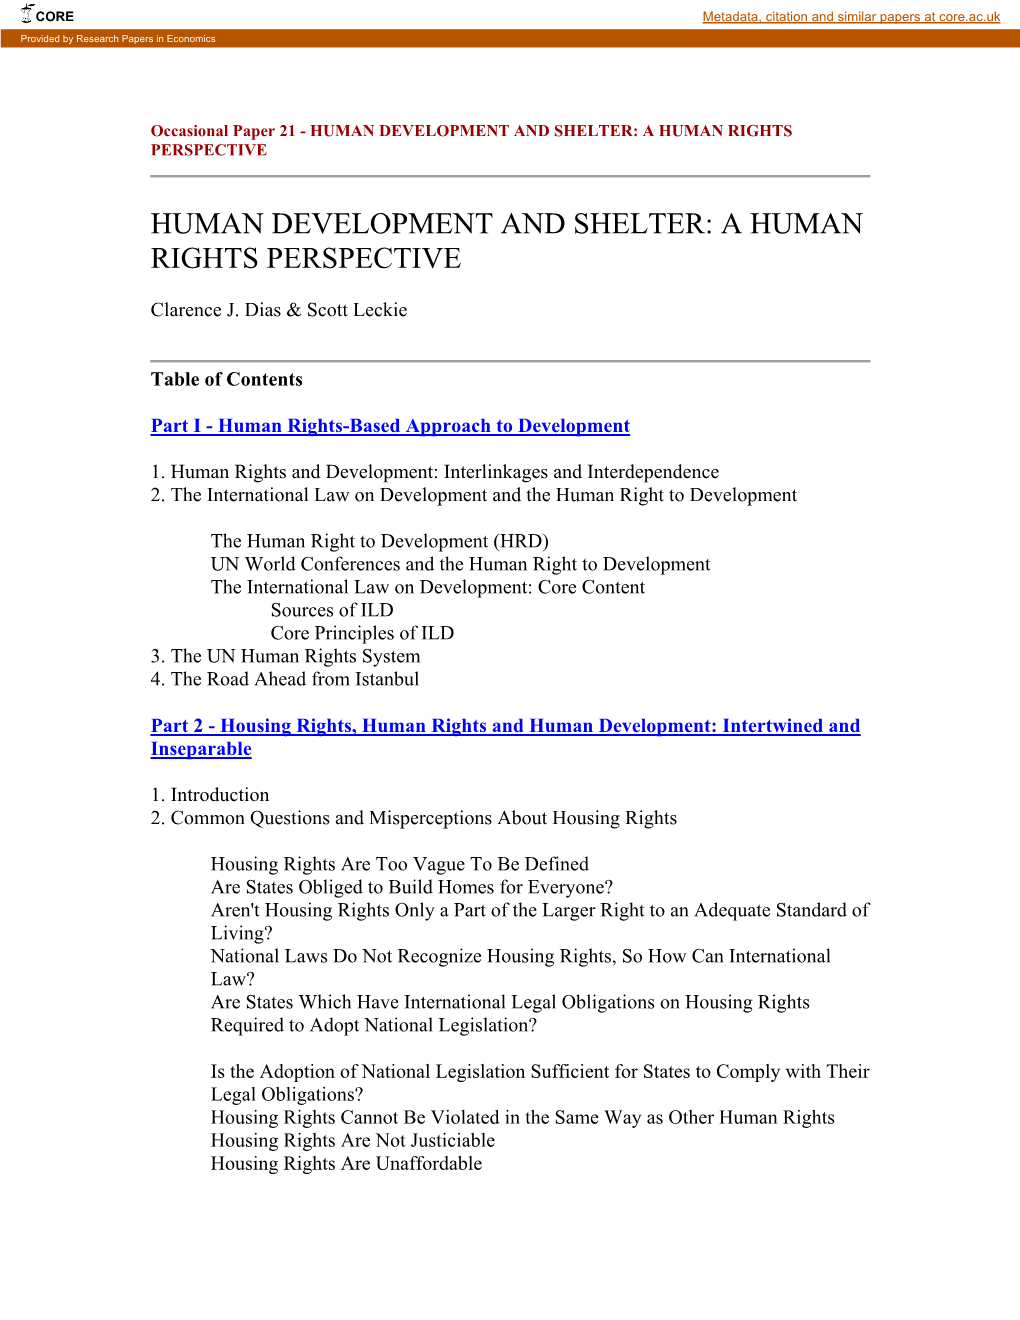 Human Development and Shelter: a Human Rights Perspective